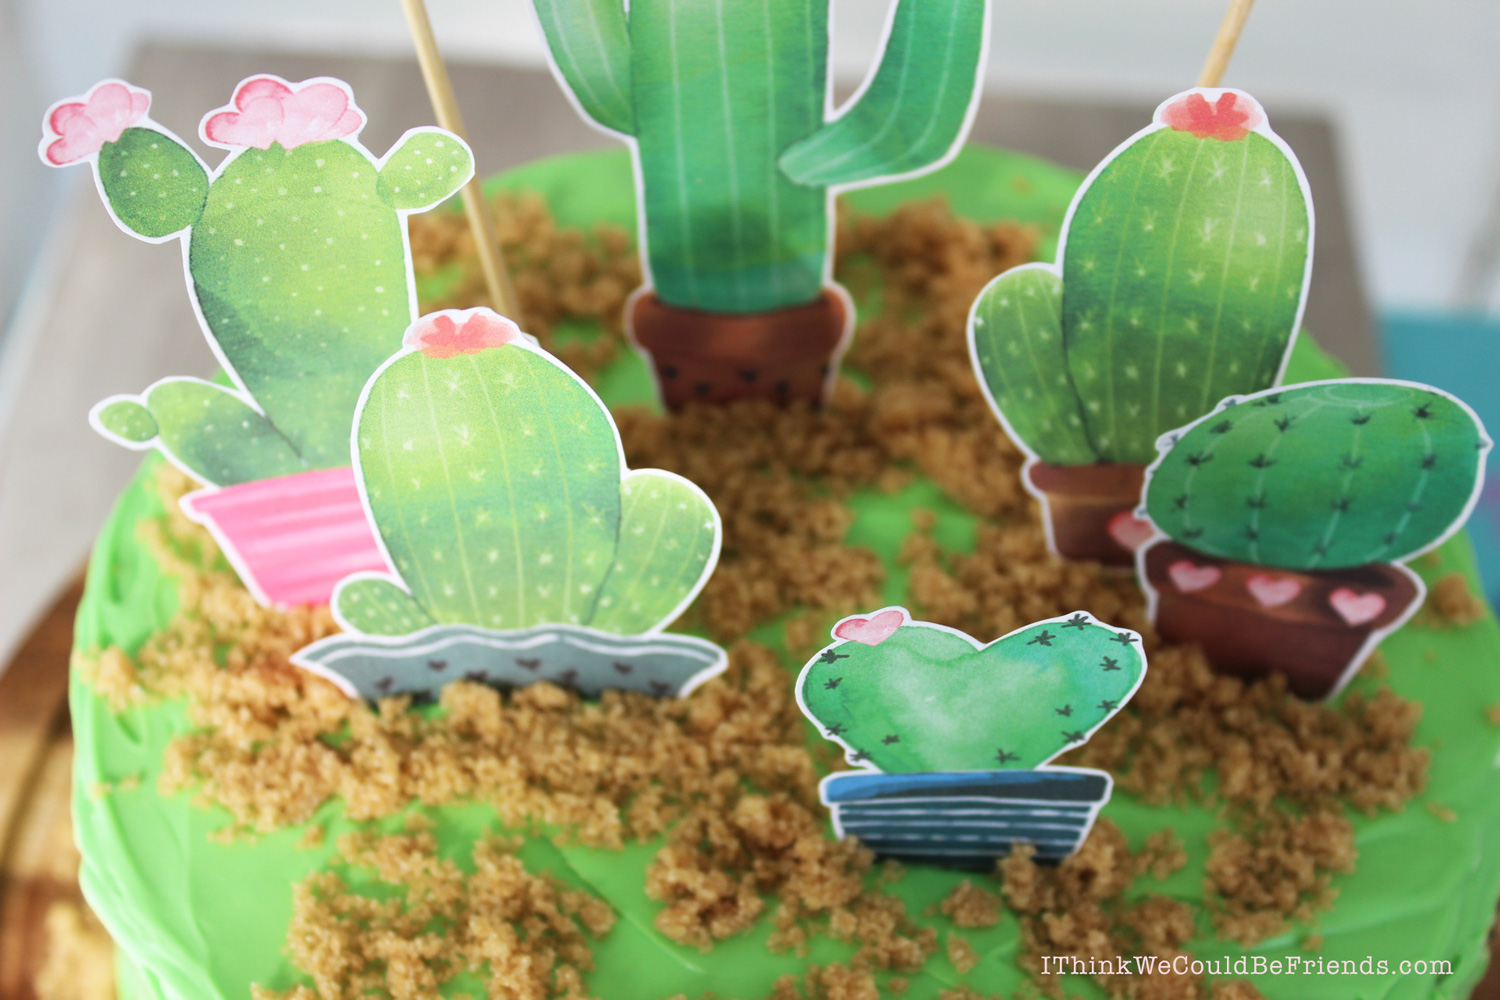 This Mother's Day Cactus Cake Topper is super EASY to make and FREE! What mom doesn't love that? You can put it on a homemade cake or store bought, just print, cut out the shapes, hot glue to skewer sticks and decorate! #mothers #day #cake #diy #decoration #topper #free #printable #cactus #succulent #easy